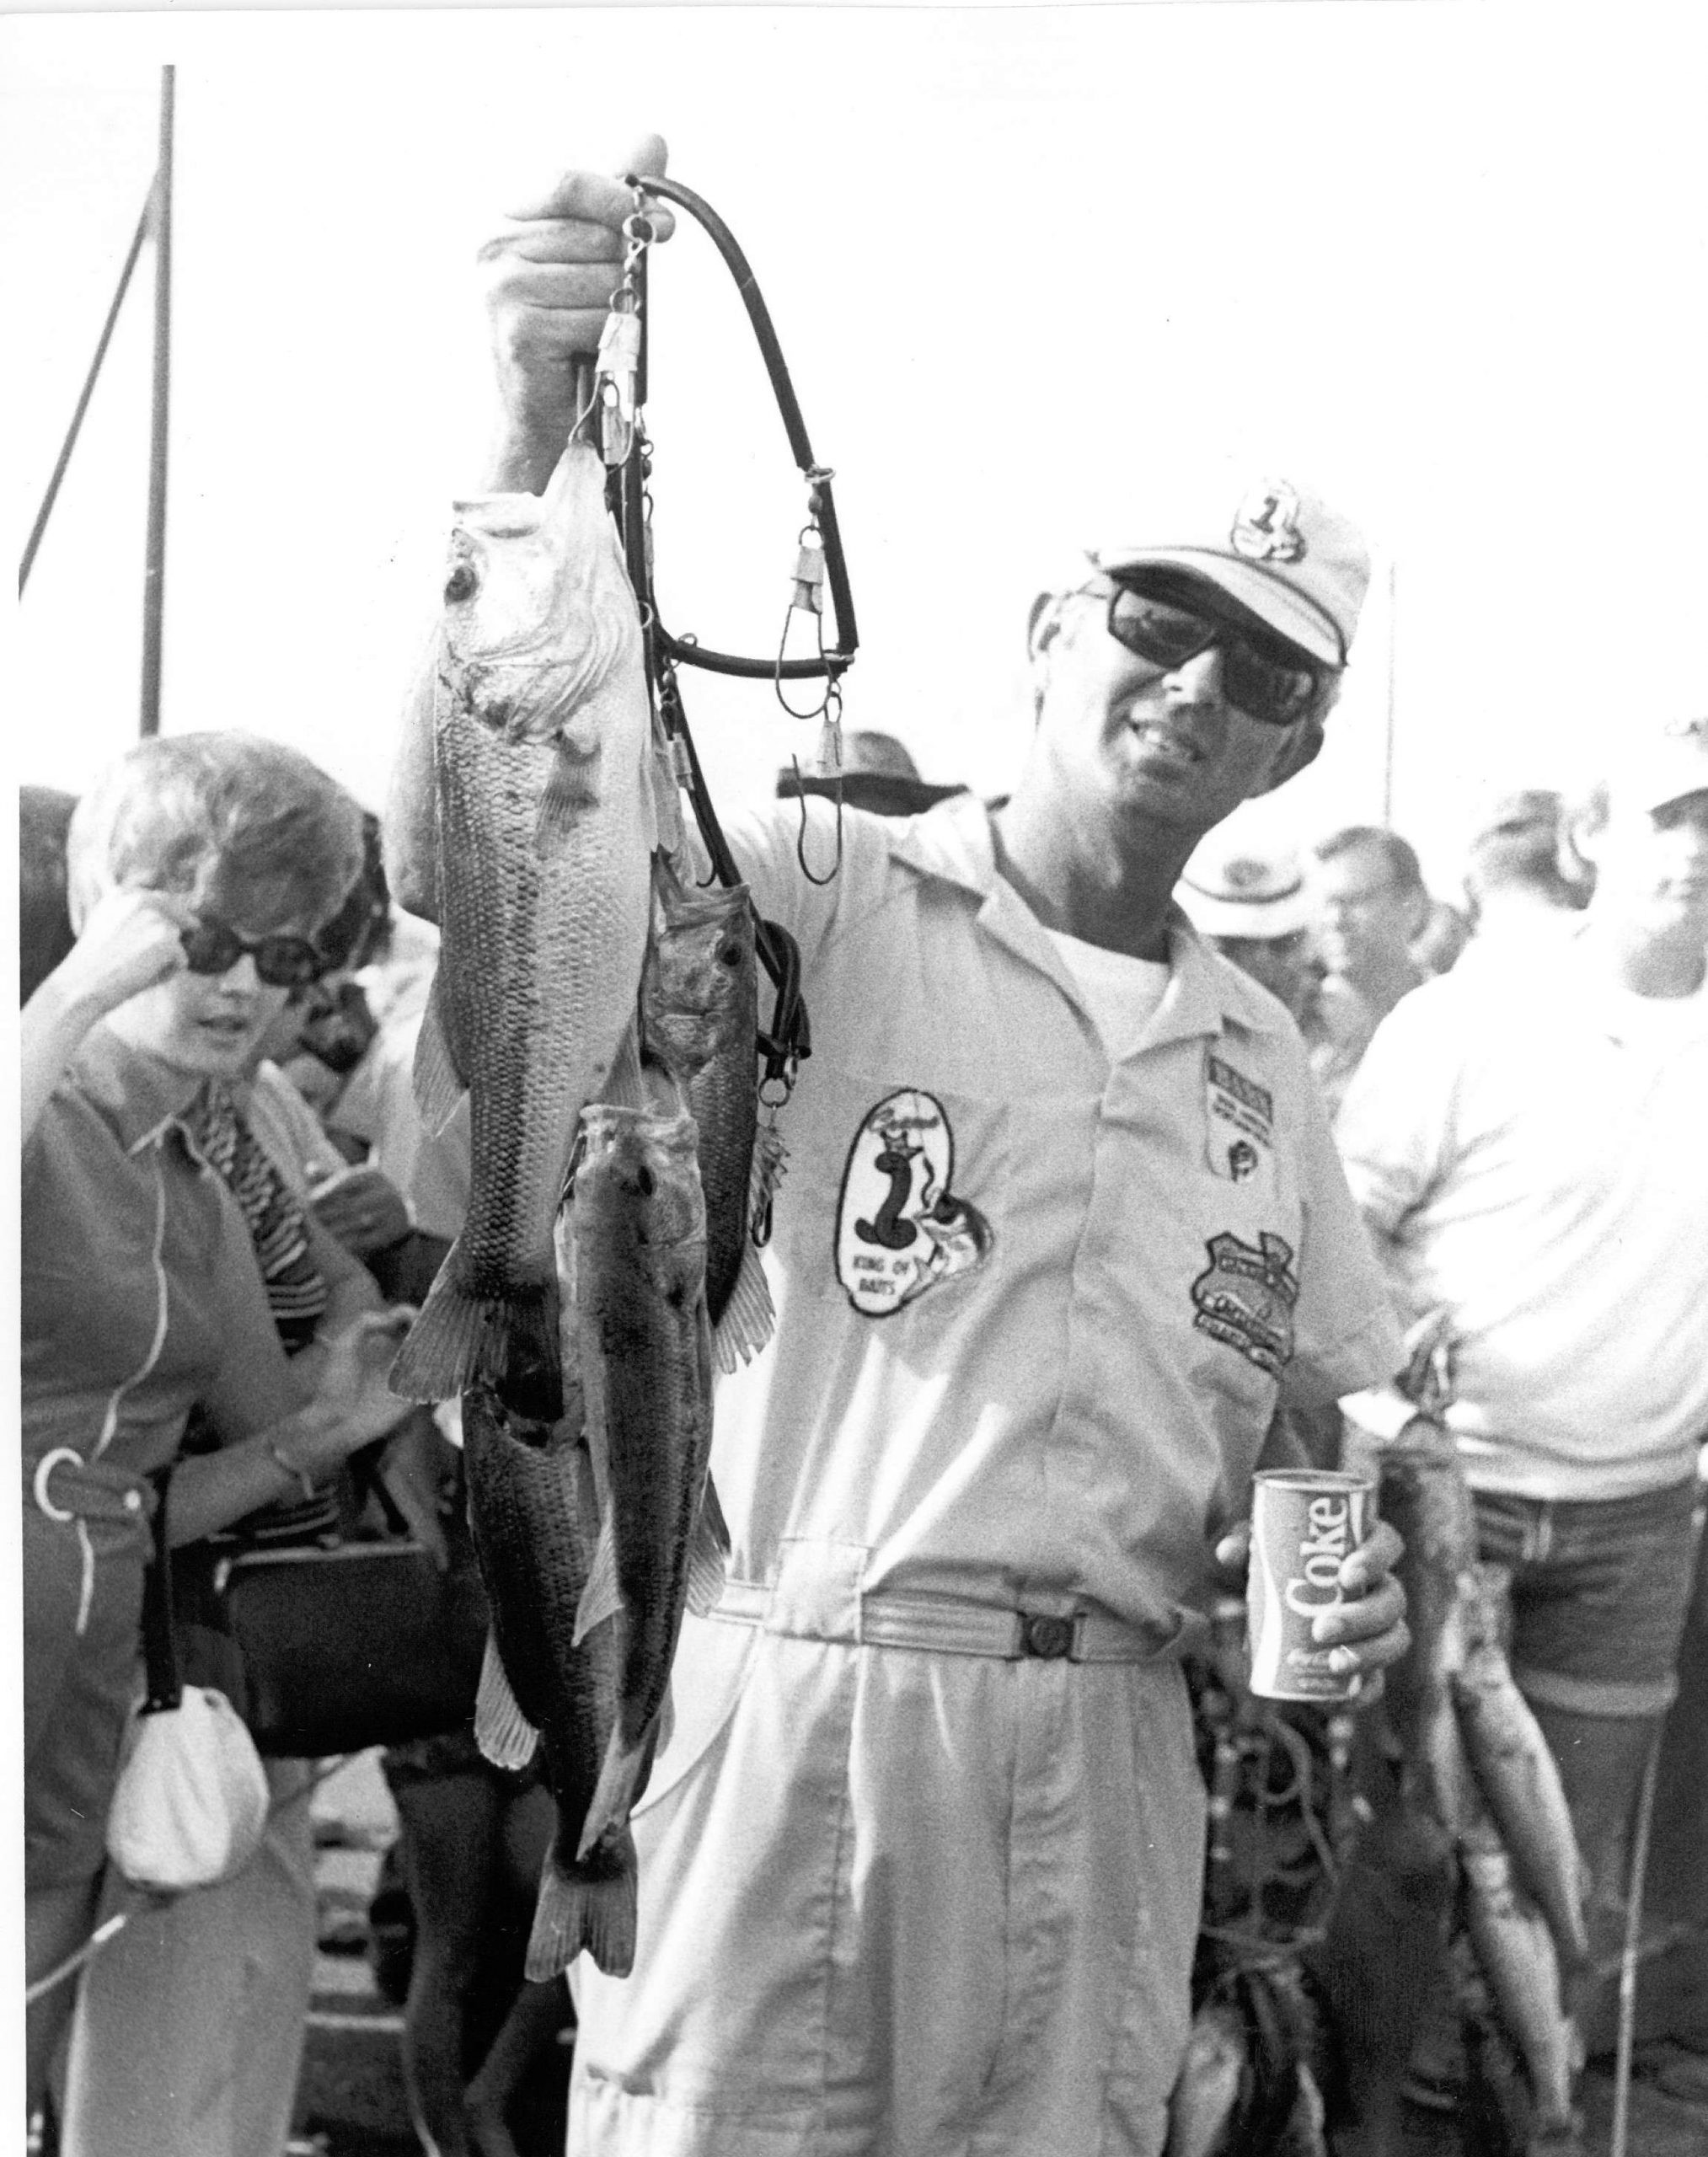 Our favorite thing about this photo is the old Coca-Cola can. It looks like product placement, but B.A.S.S. was not nearly big enough at the time to have mainstream sponsors with that much clout.